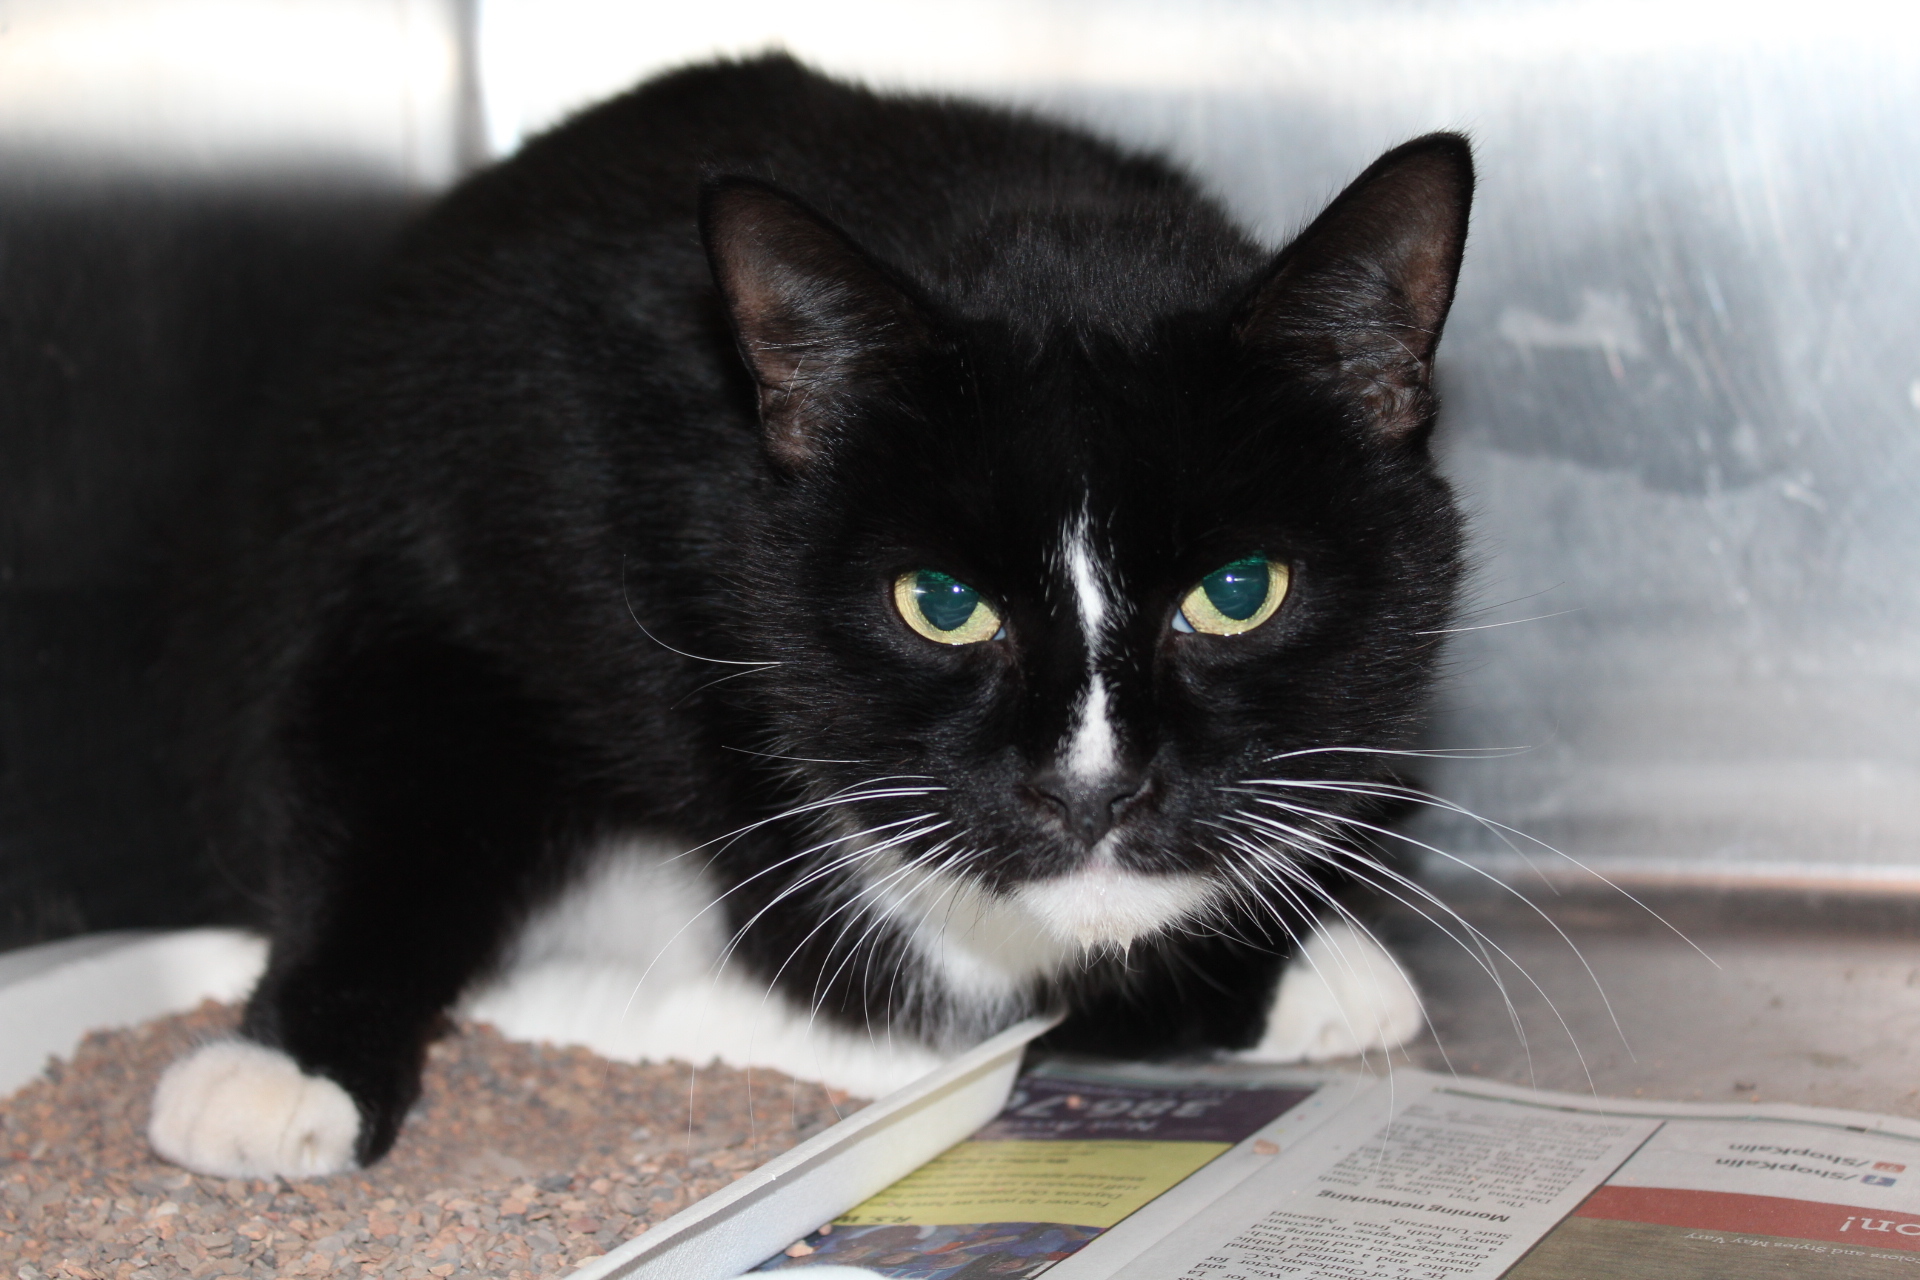 Howard was featured in last week's edition, and is still in need of a home. Courtesy photo